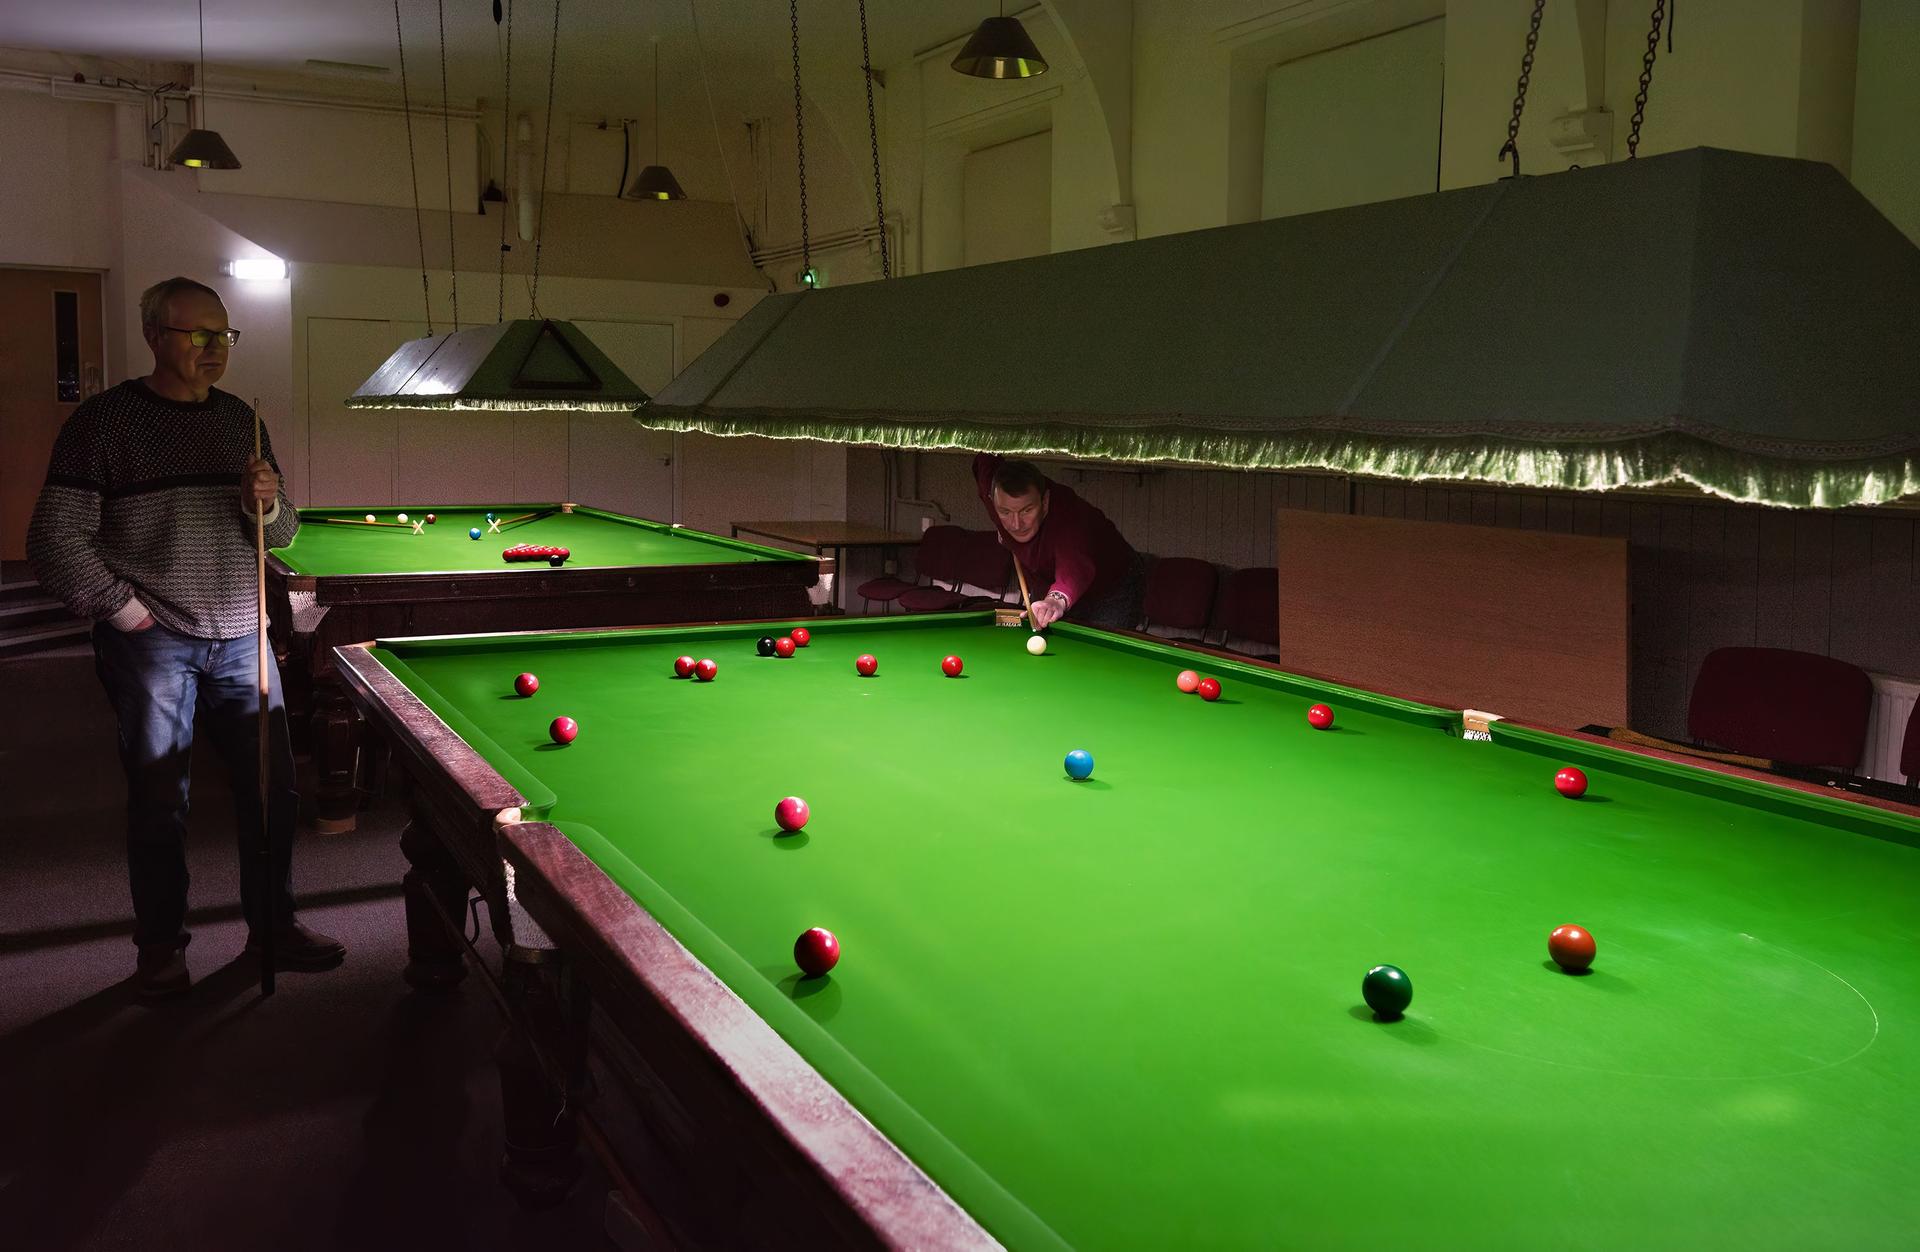 The Snooker Hall